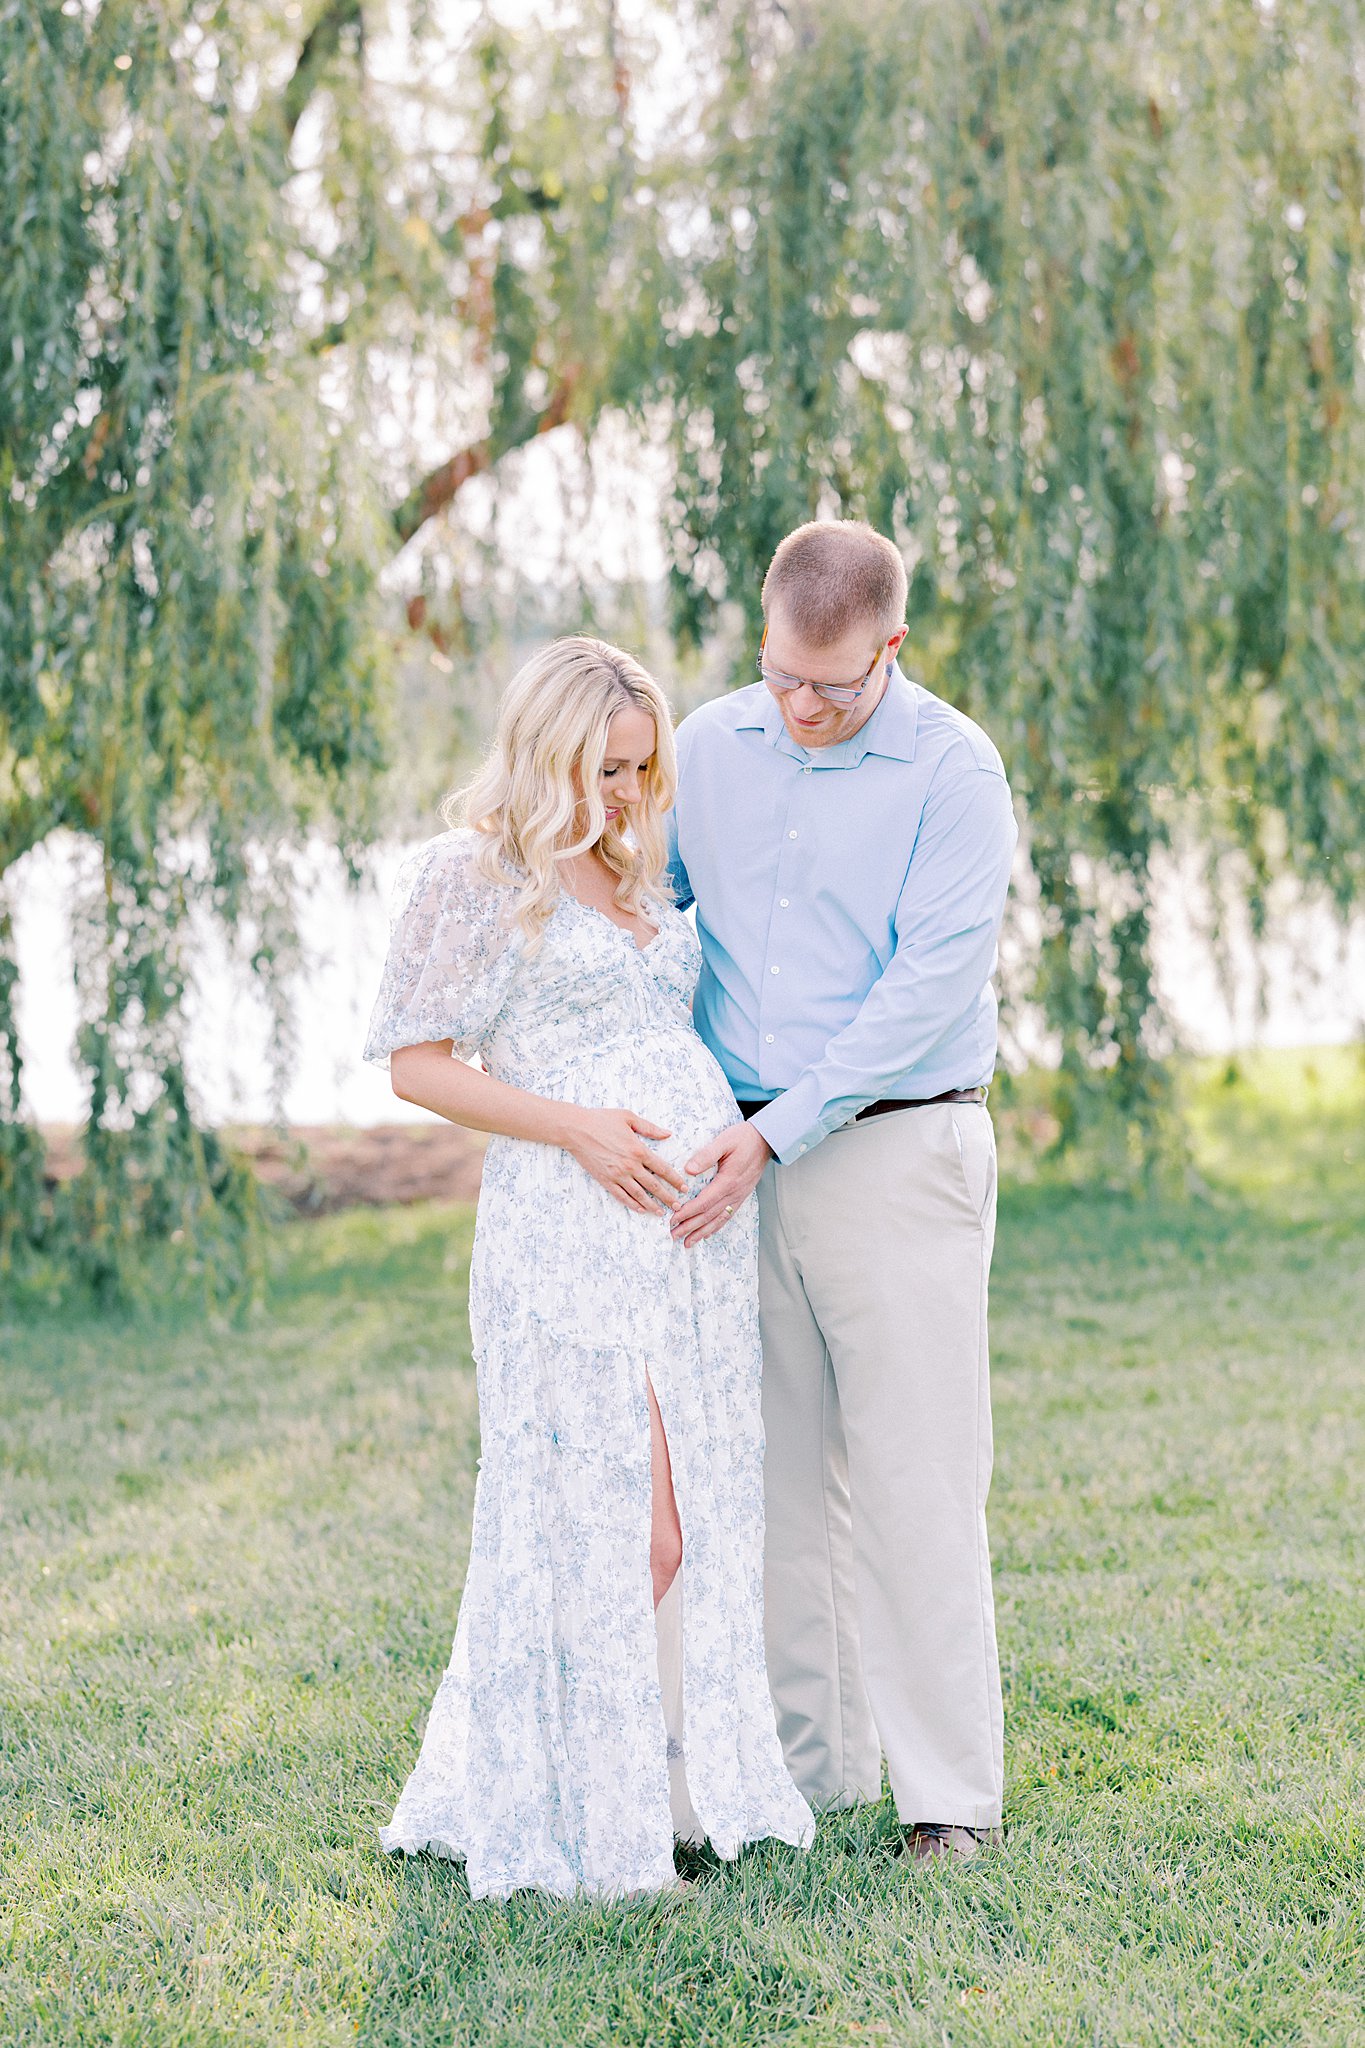 A mom to be in a floral print dress smiles down at the bump in her hands while standing lakeside under a willow tree